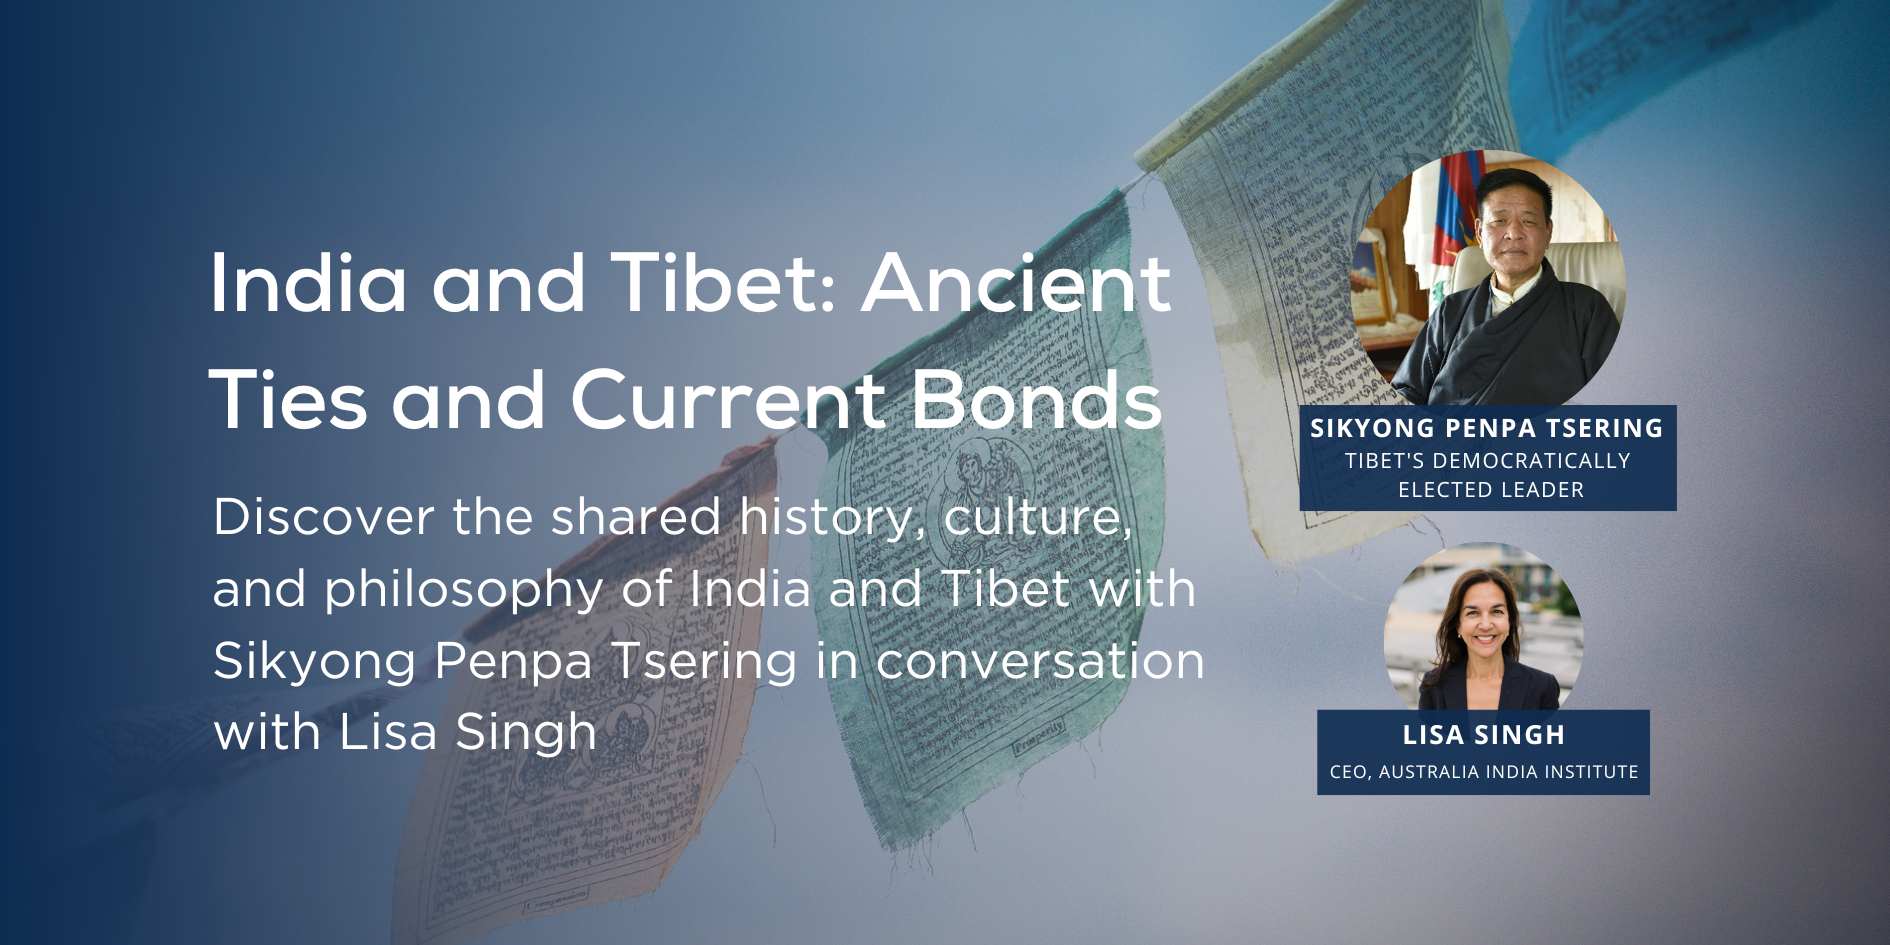 India and Tibet: Ancient Ties and Current Bonds